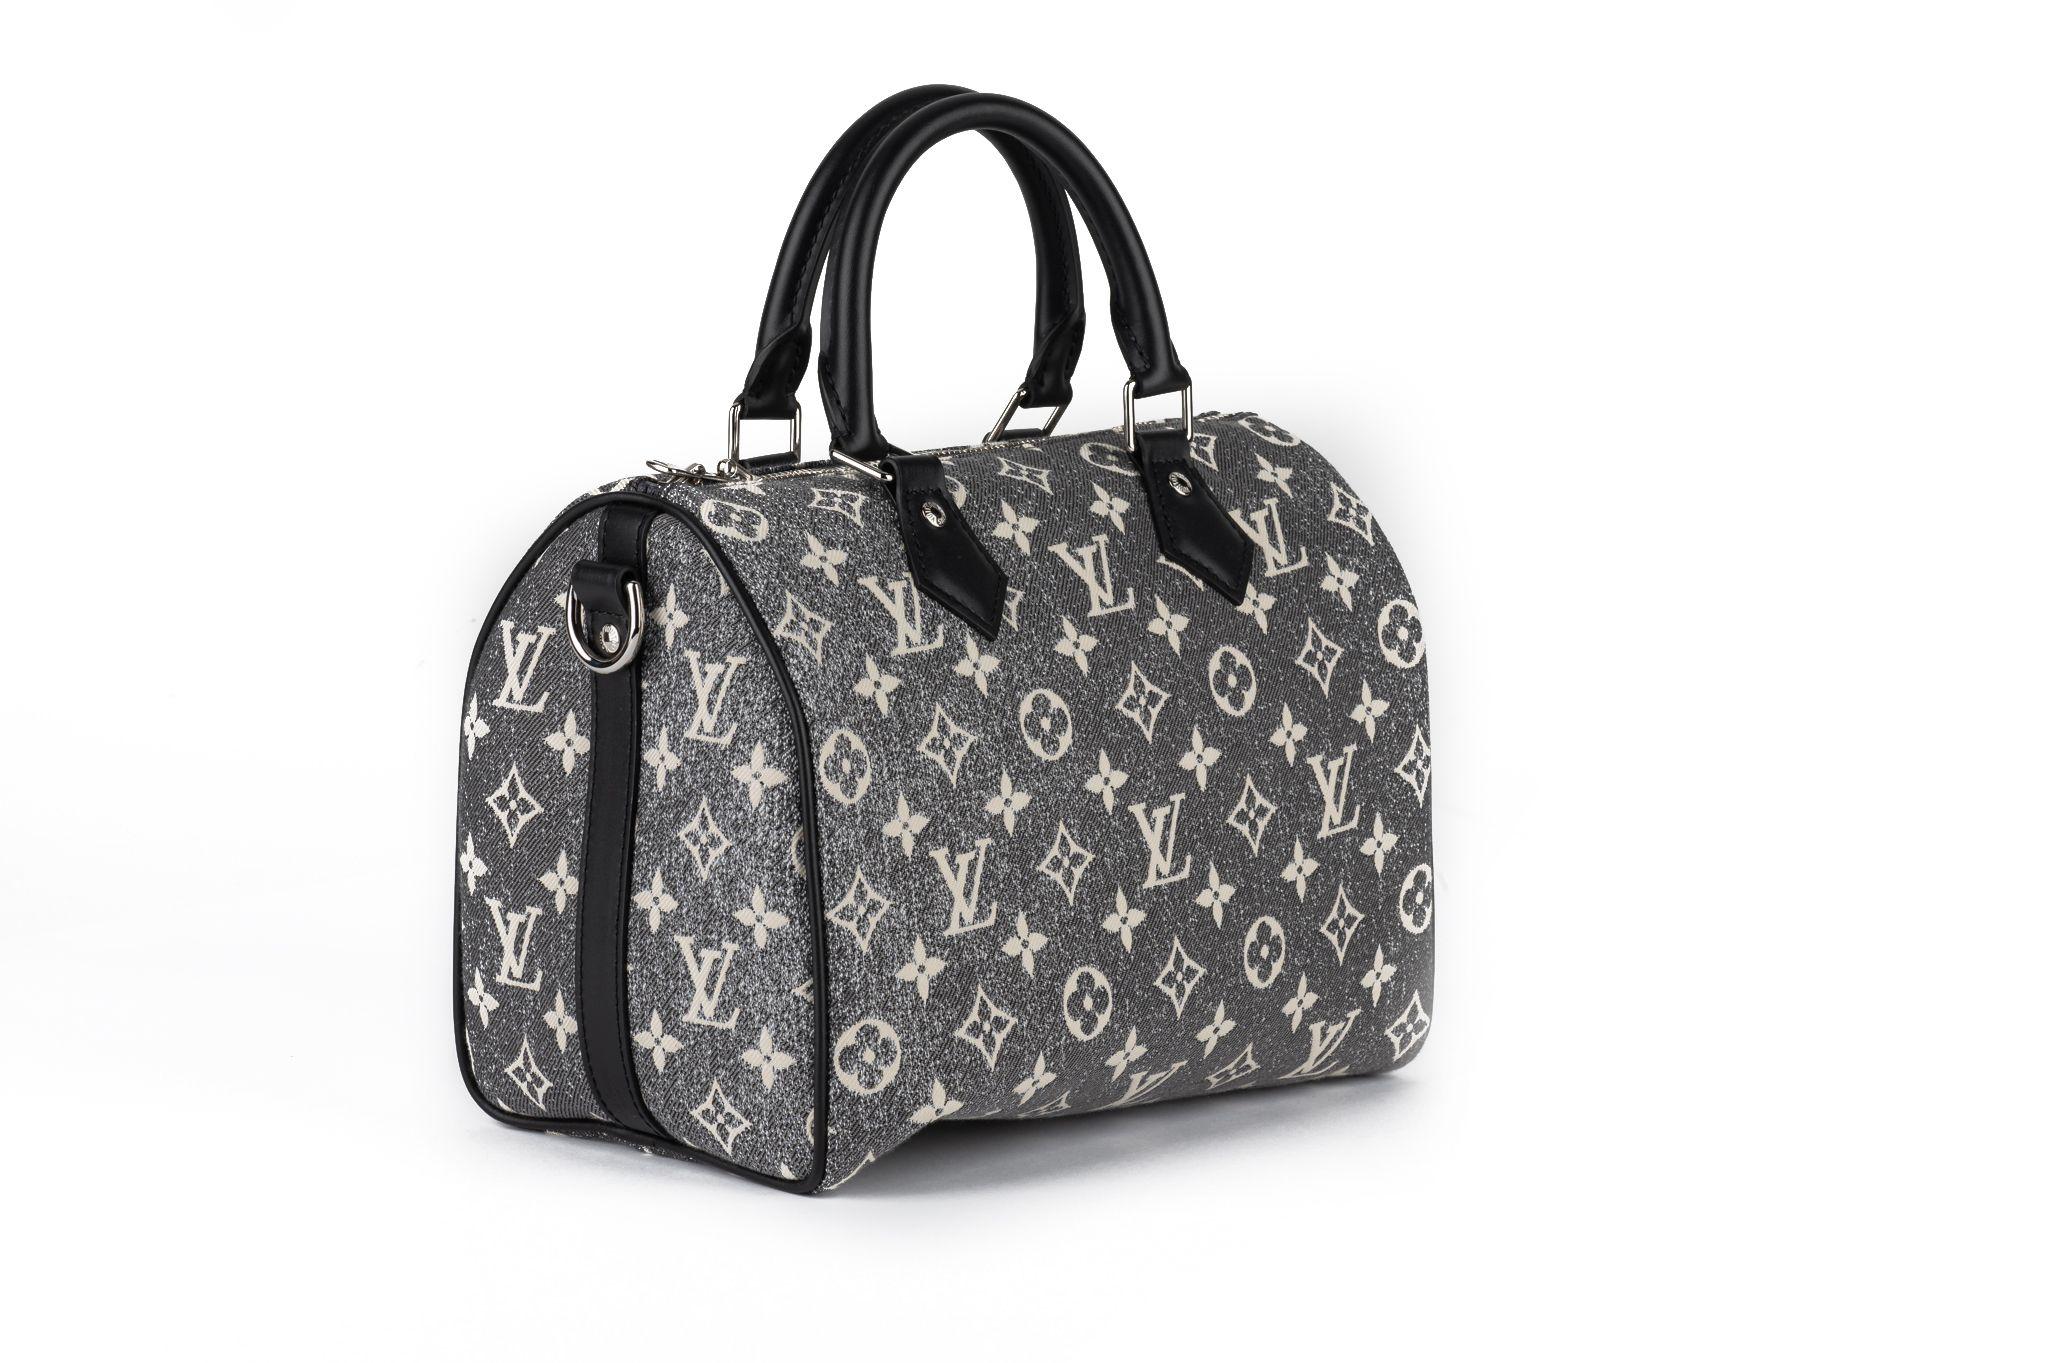 Louis Vuitton new speedy 25 in grey denim monogram toile and black cowhide trim. Handle drops 3”, detachable and adjustable shoulder strap 20.5”. Comes with original dust cover and box.